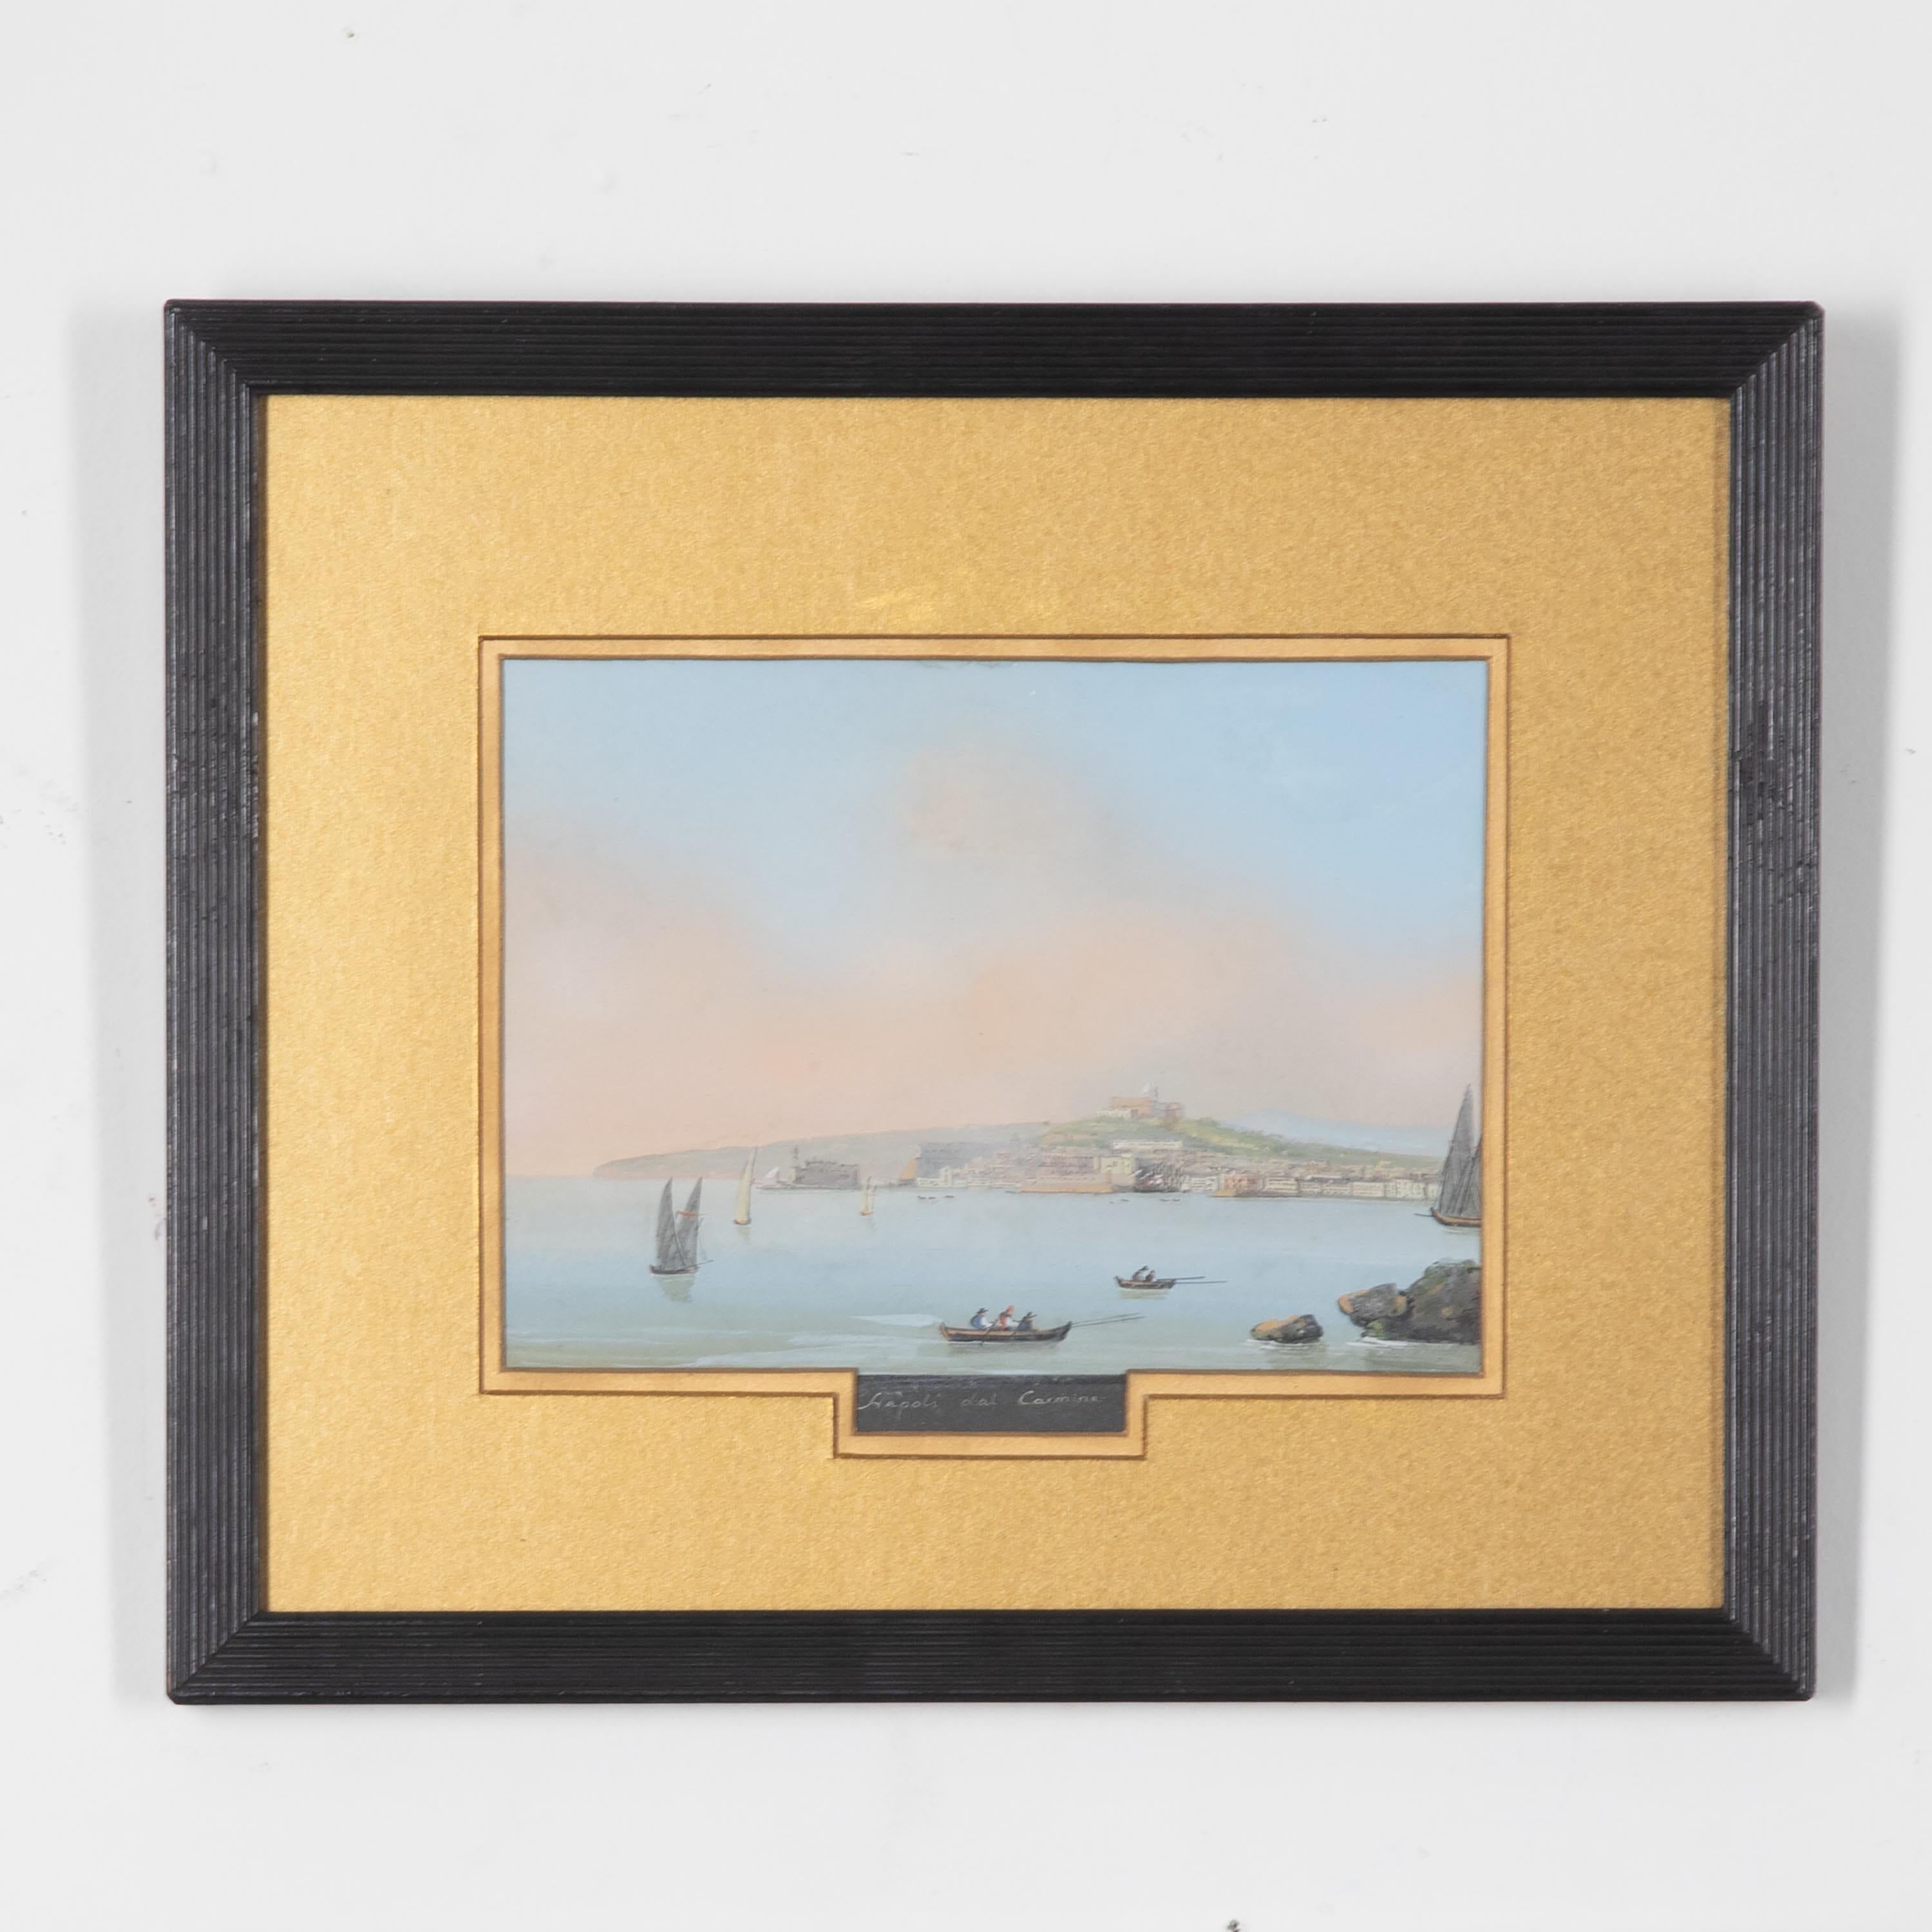 A rare of 6 mid C19th classical Grand Tour gouaches of unusual scenes depicting Naples, Pompéi and Vesuvius, with broad gold slips and ebonised reeded frames. Circa 1860
Largest 4 - 35cm x 29cm, smaller pair -32cm x 28cm.

